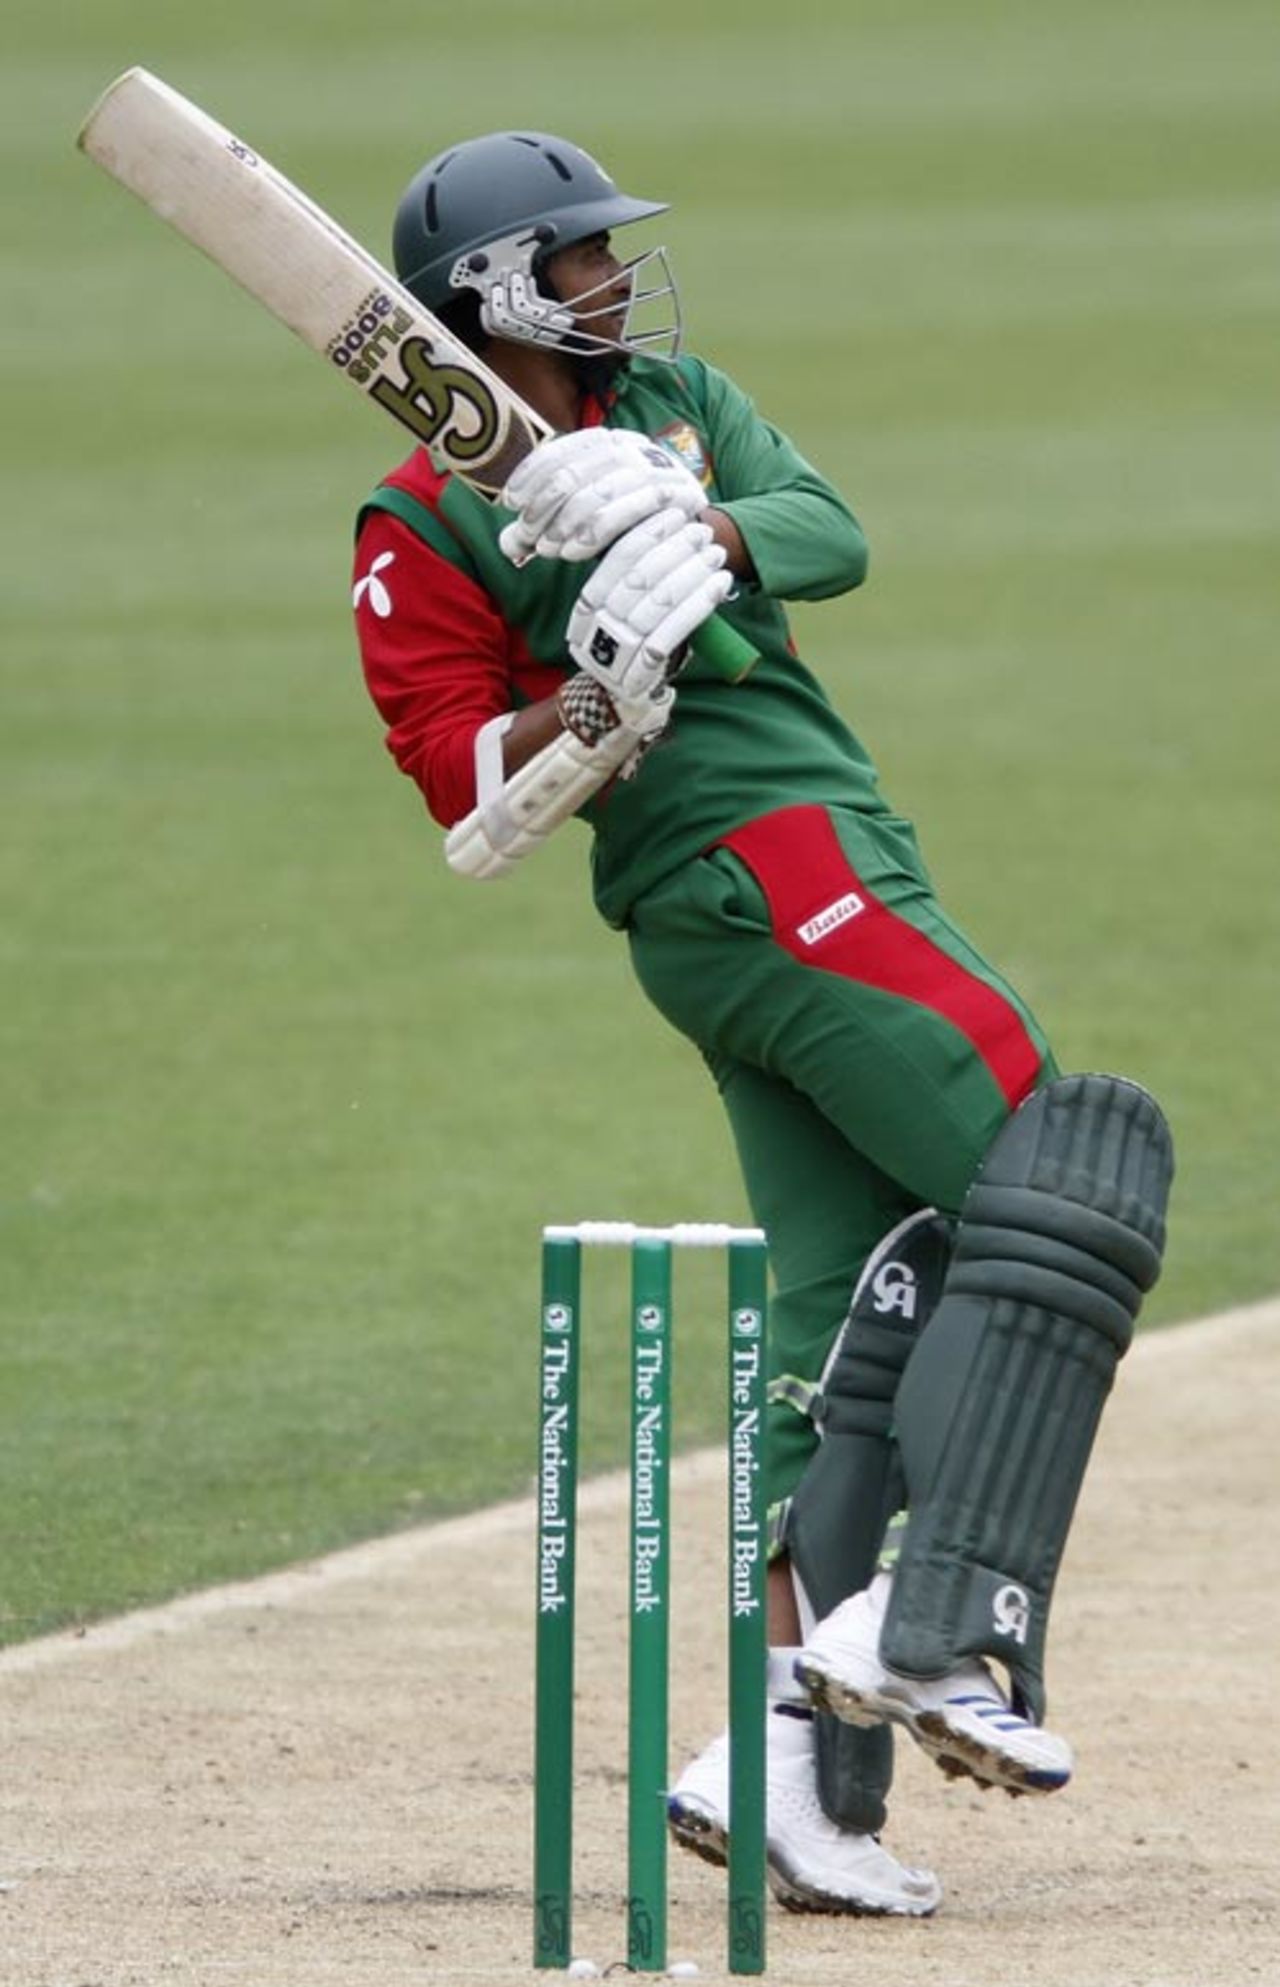 Shakib Al Hasan made it to double digits for the first time on tour, New Zealand v Bangladesh, 3rd ODI, Christchurch, February 11, 2010